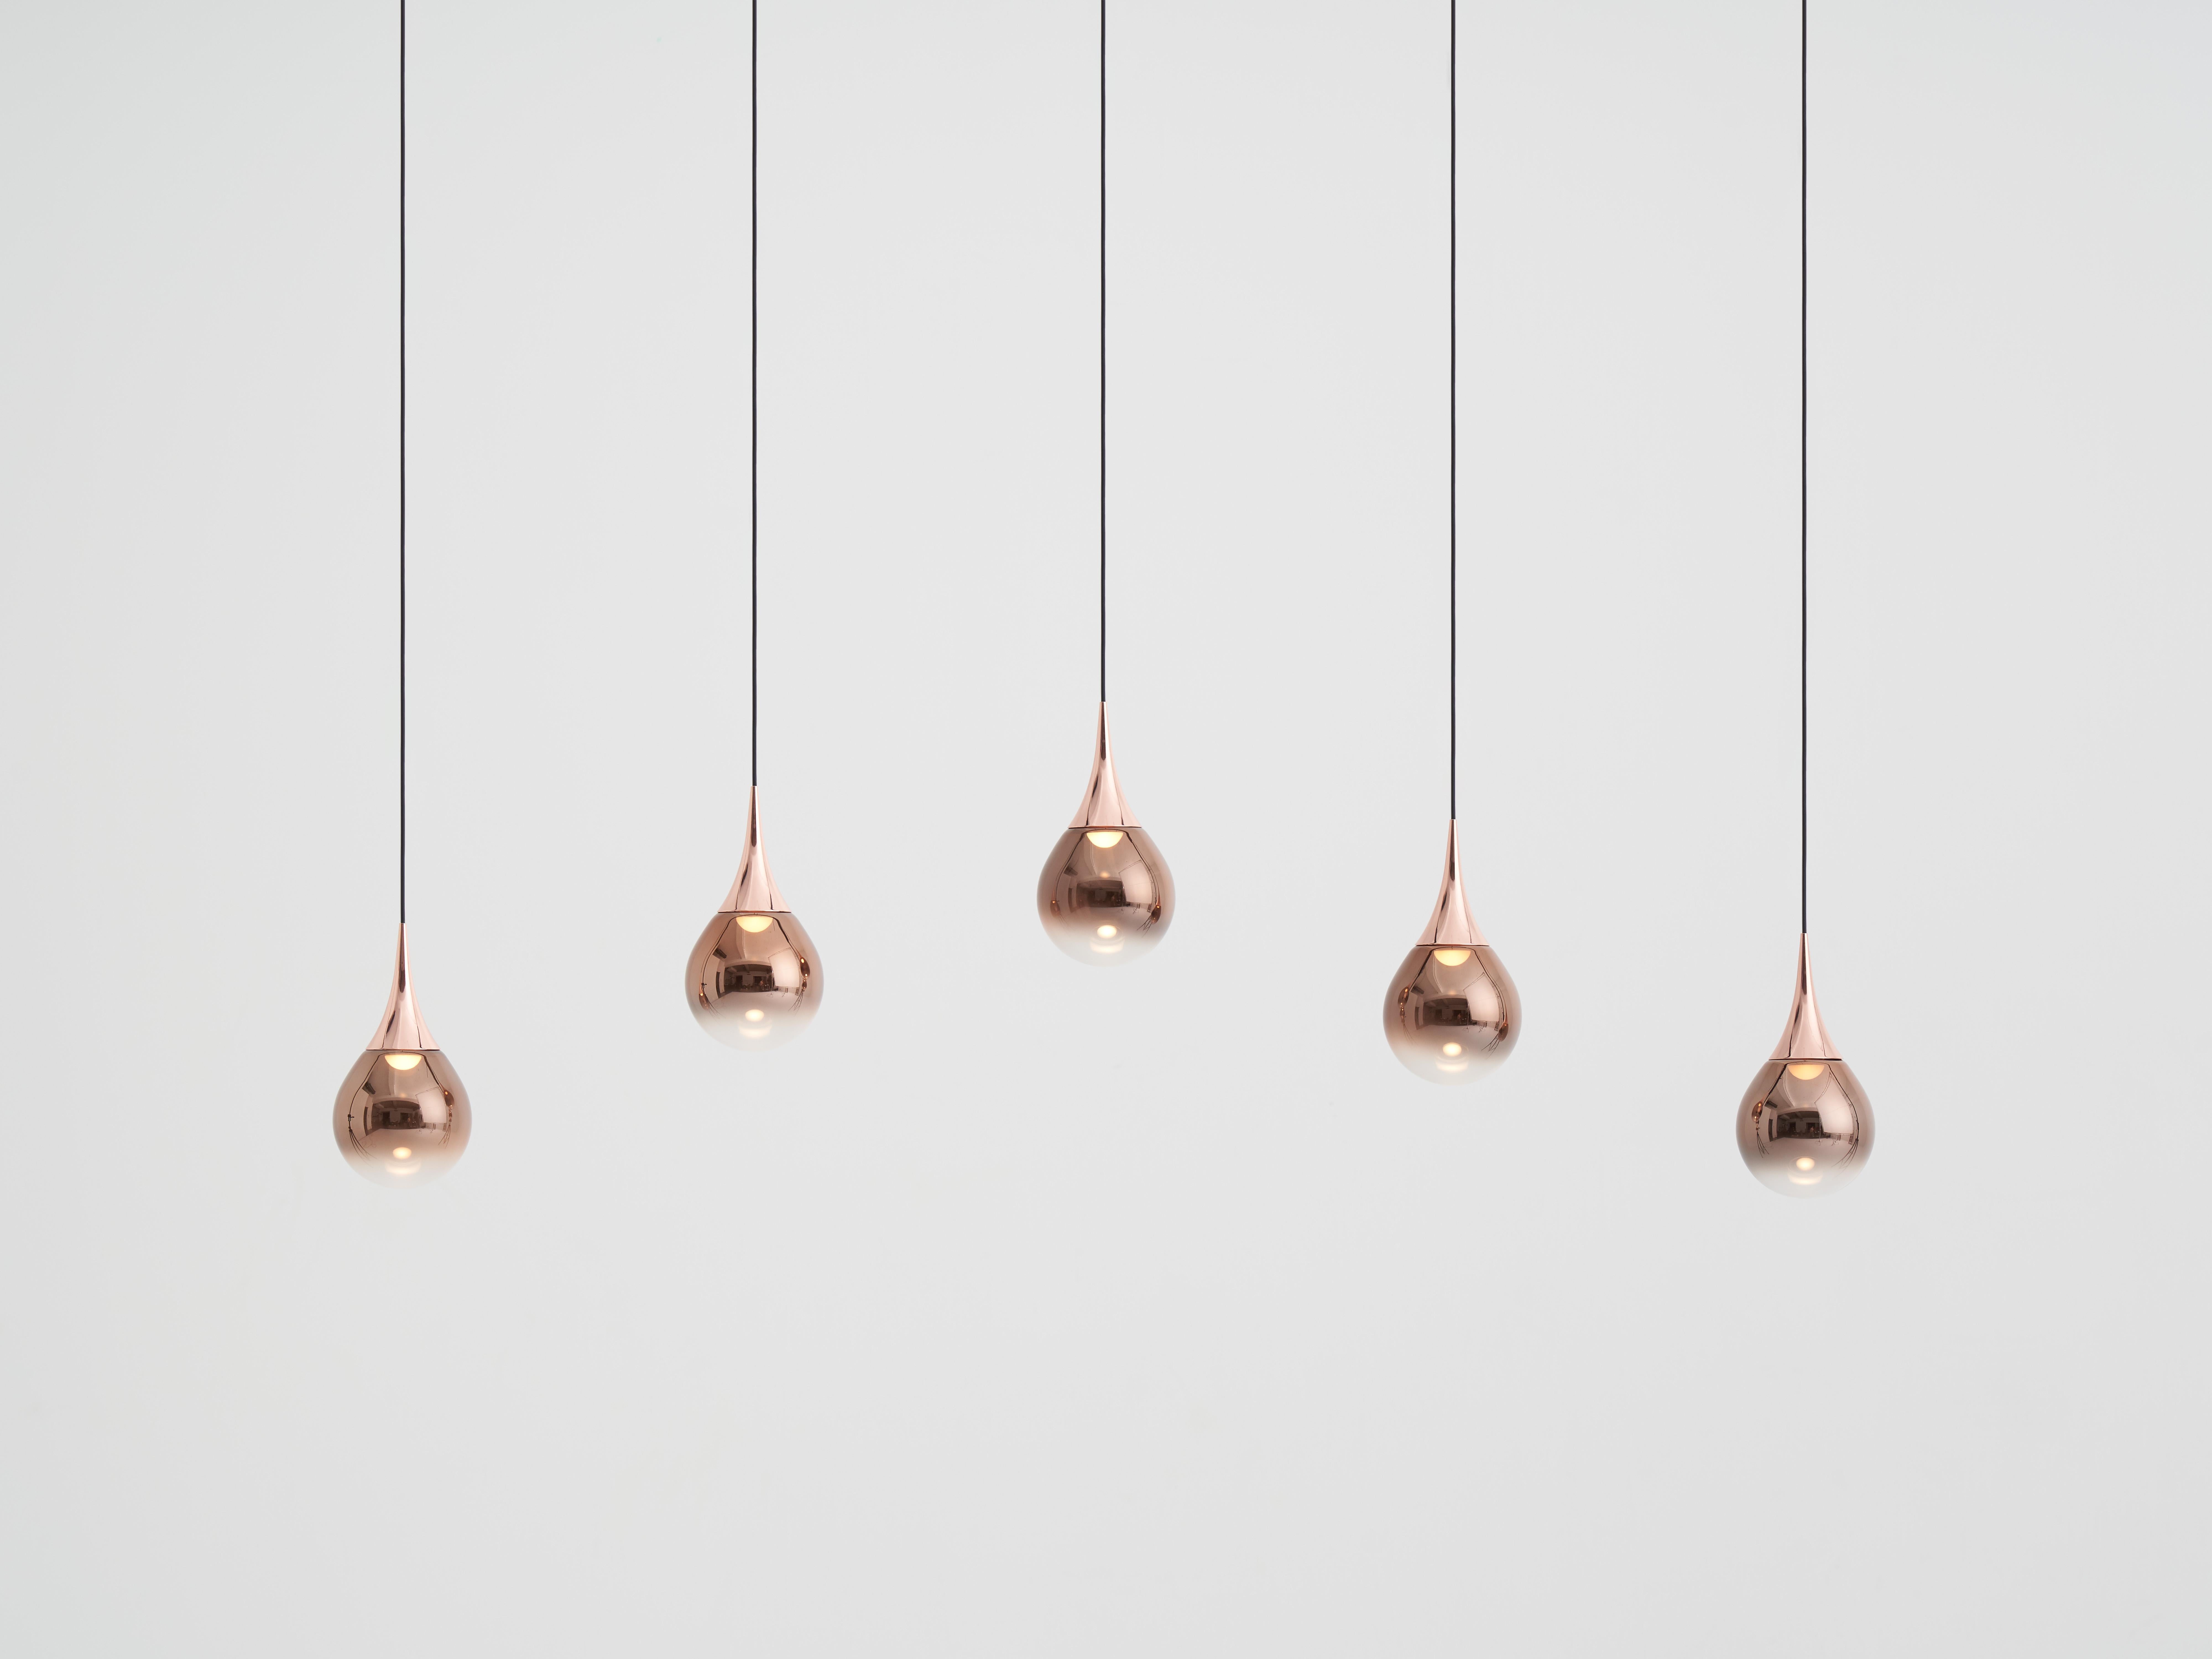 Inspired by artistry of fine jewelry, the PaoPao collection is available in three colorways, and multiple configurations. Each glass sphere of PAOPAO Pendant PL5 is mouth-blown and vacuum plated to create a unique layered effect. The glass sphere